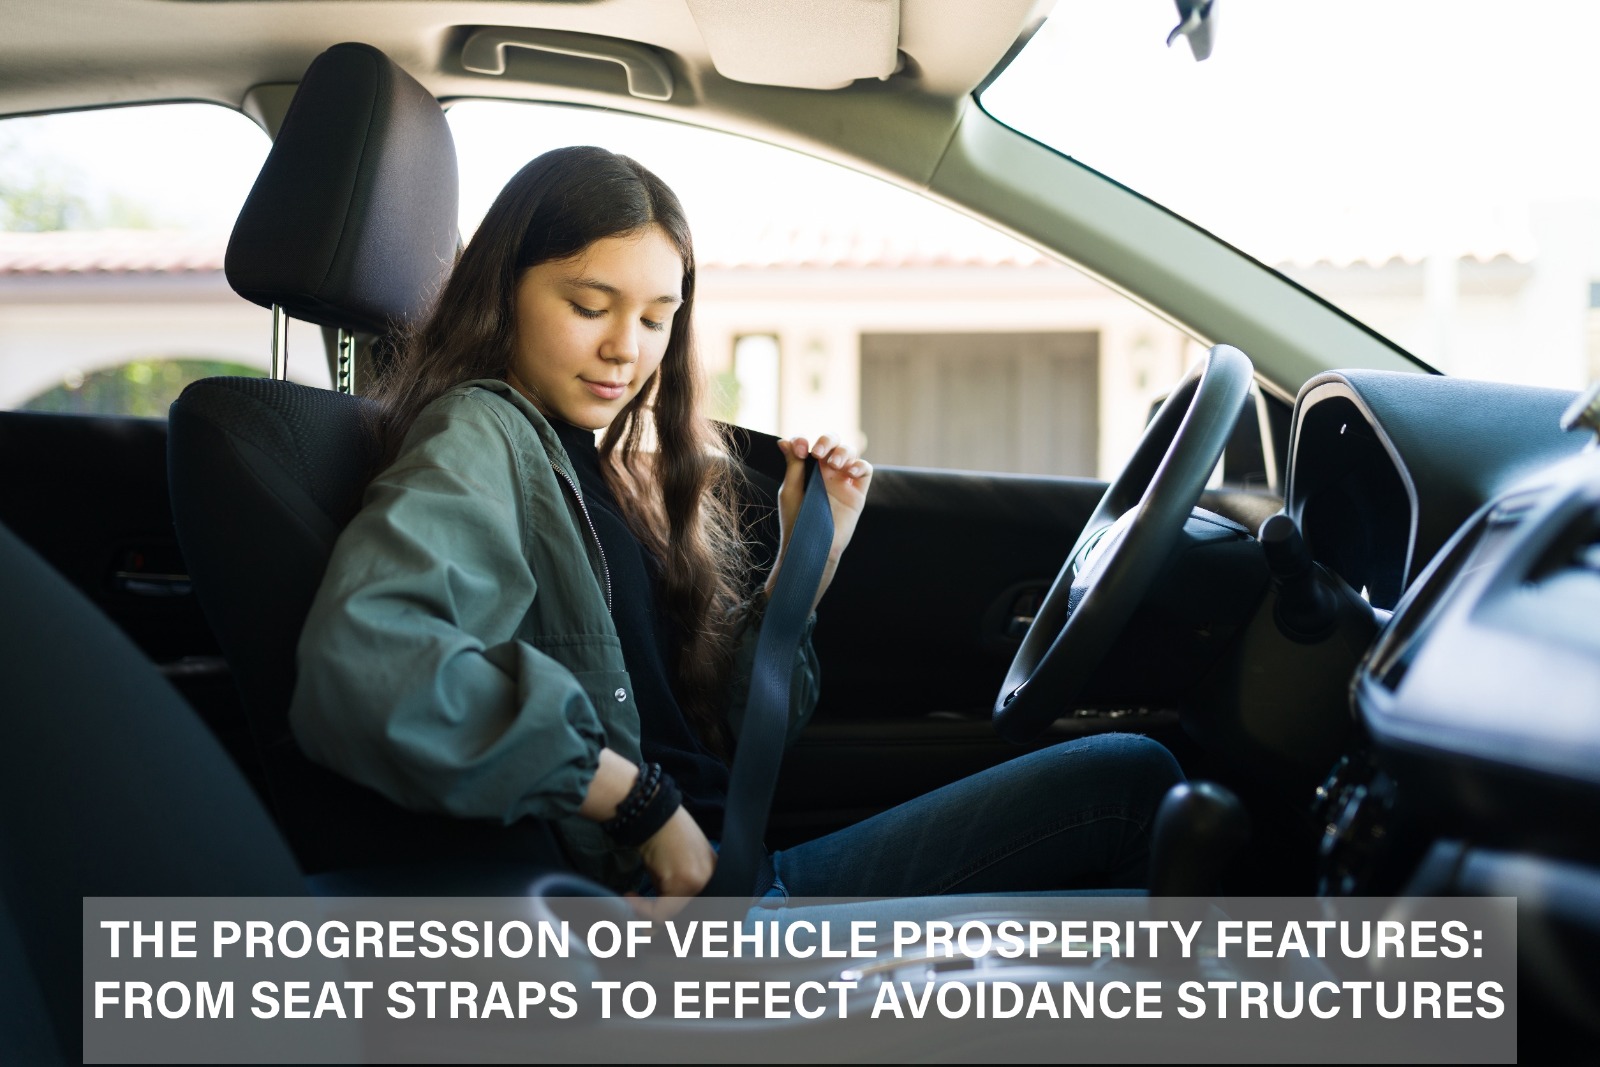 The Progression of Vehicle Prosperity Features: From Seat Straps to Effect Avoidance Structures